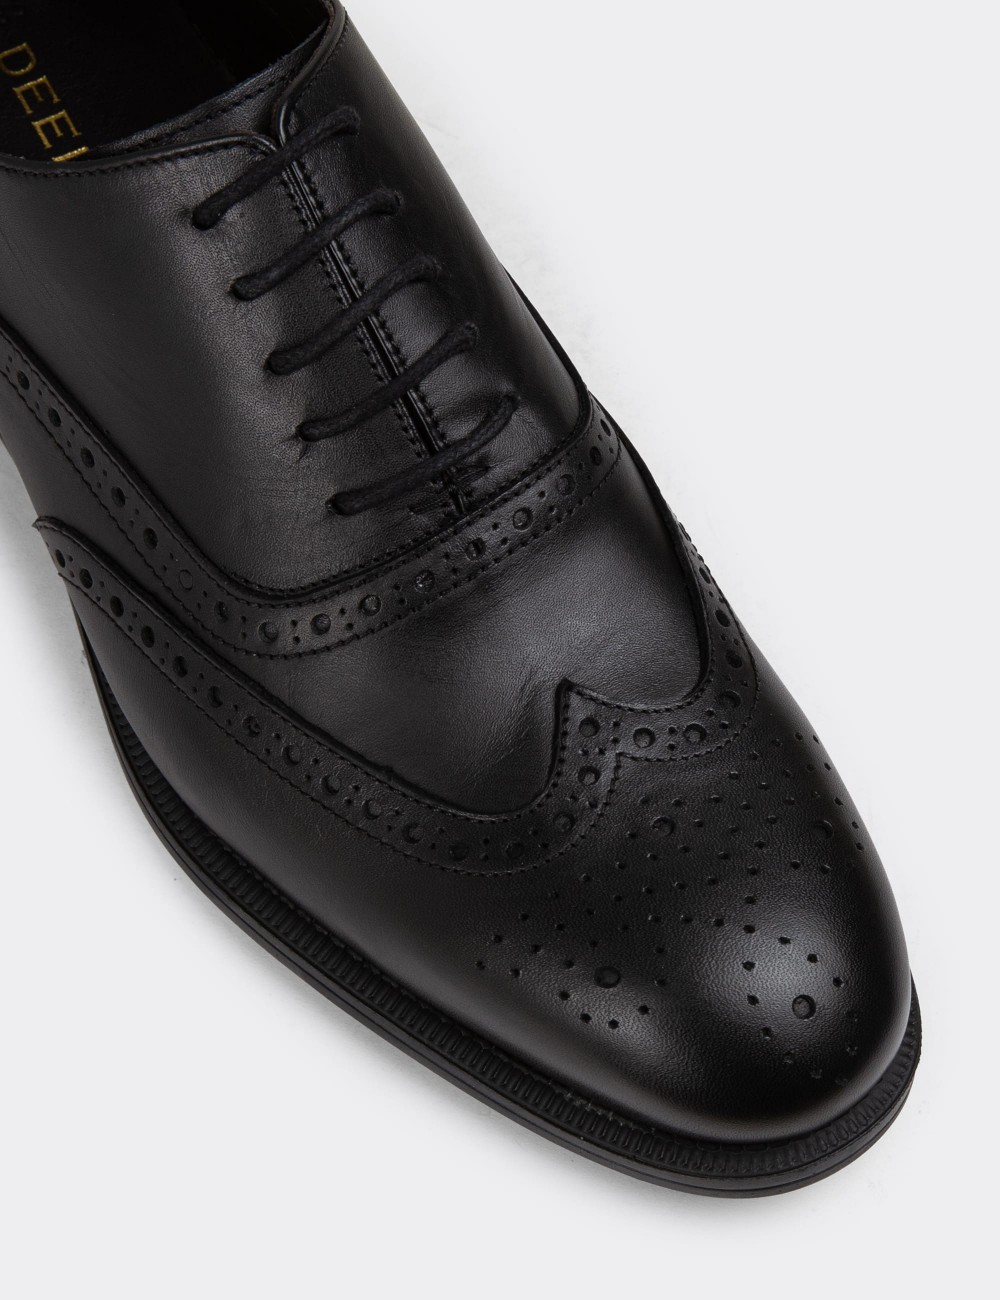 Black Leather Classic Shoes - 01785MSYHC01